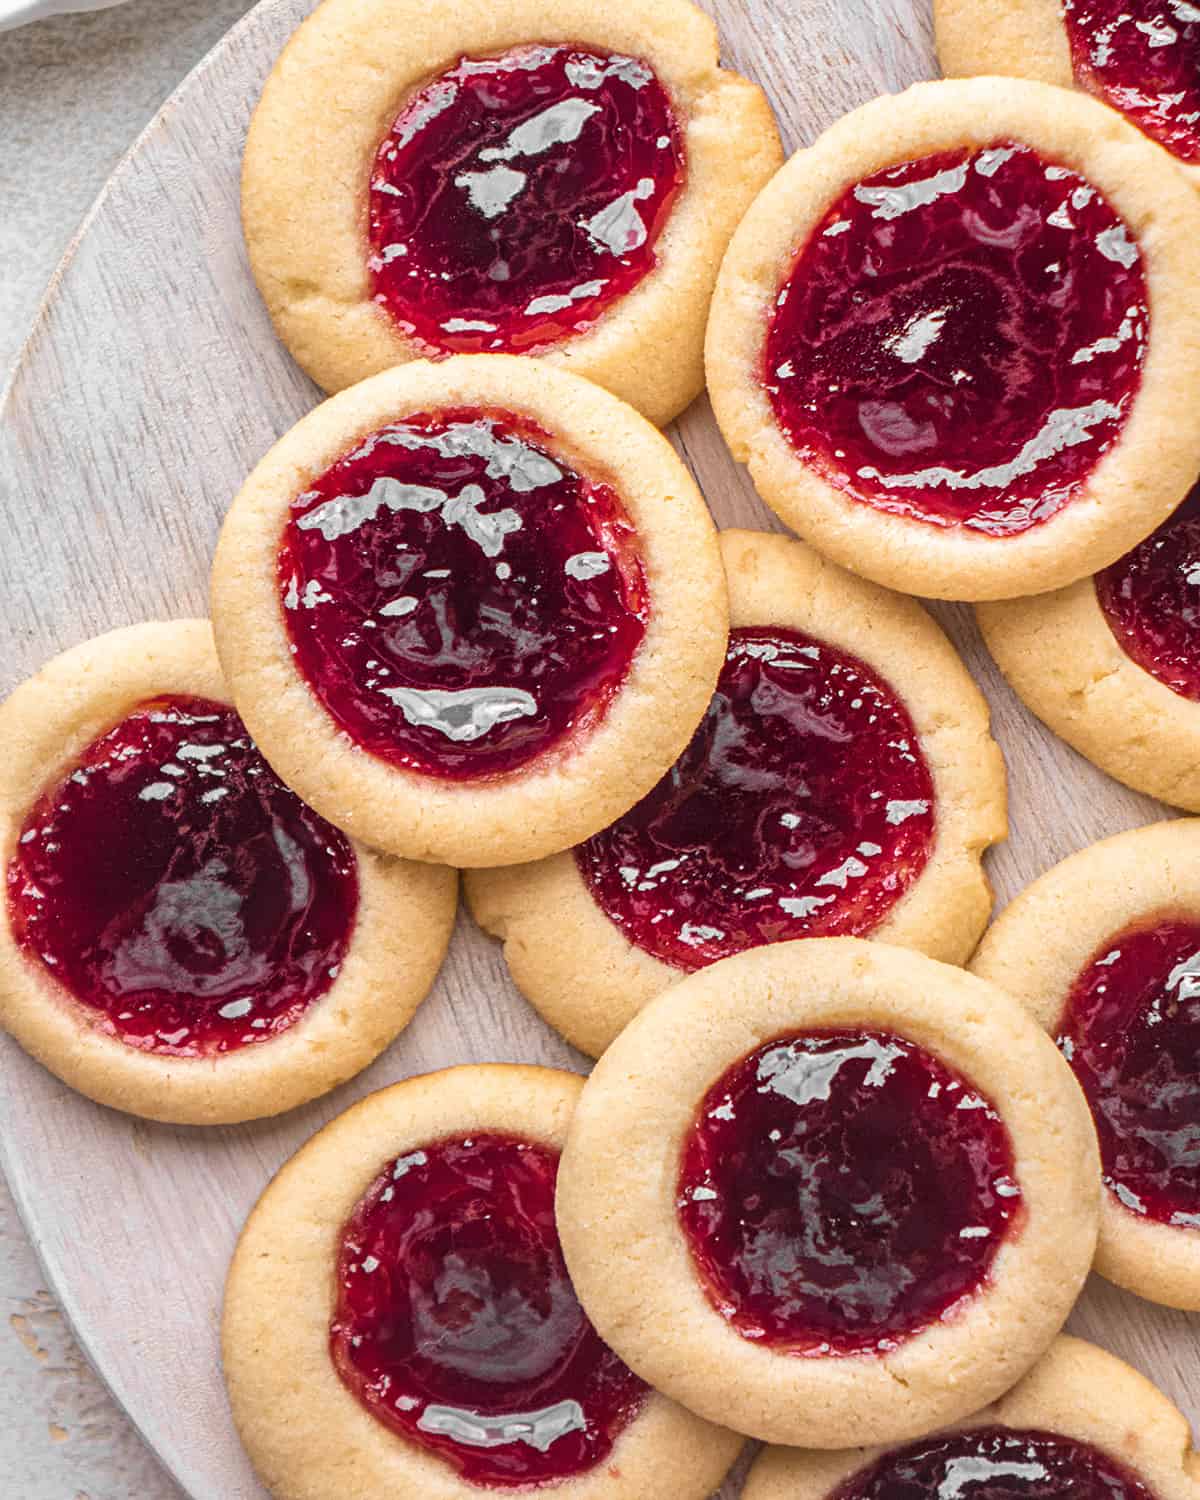 10 thumbprint cookies on a wooden serving tray